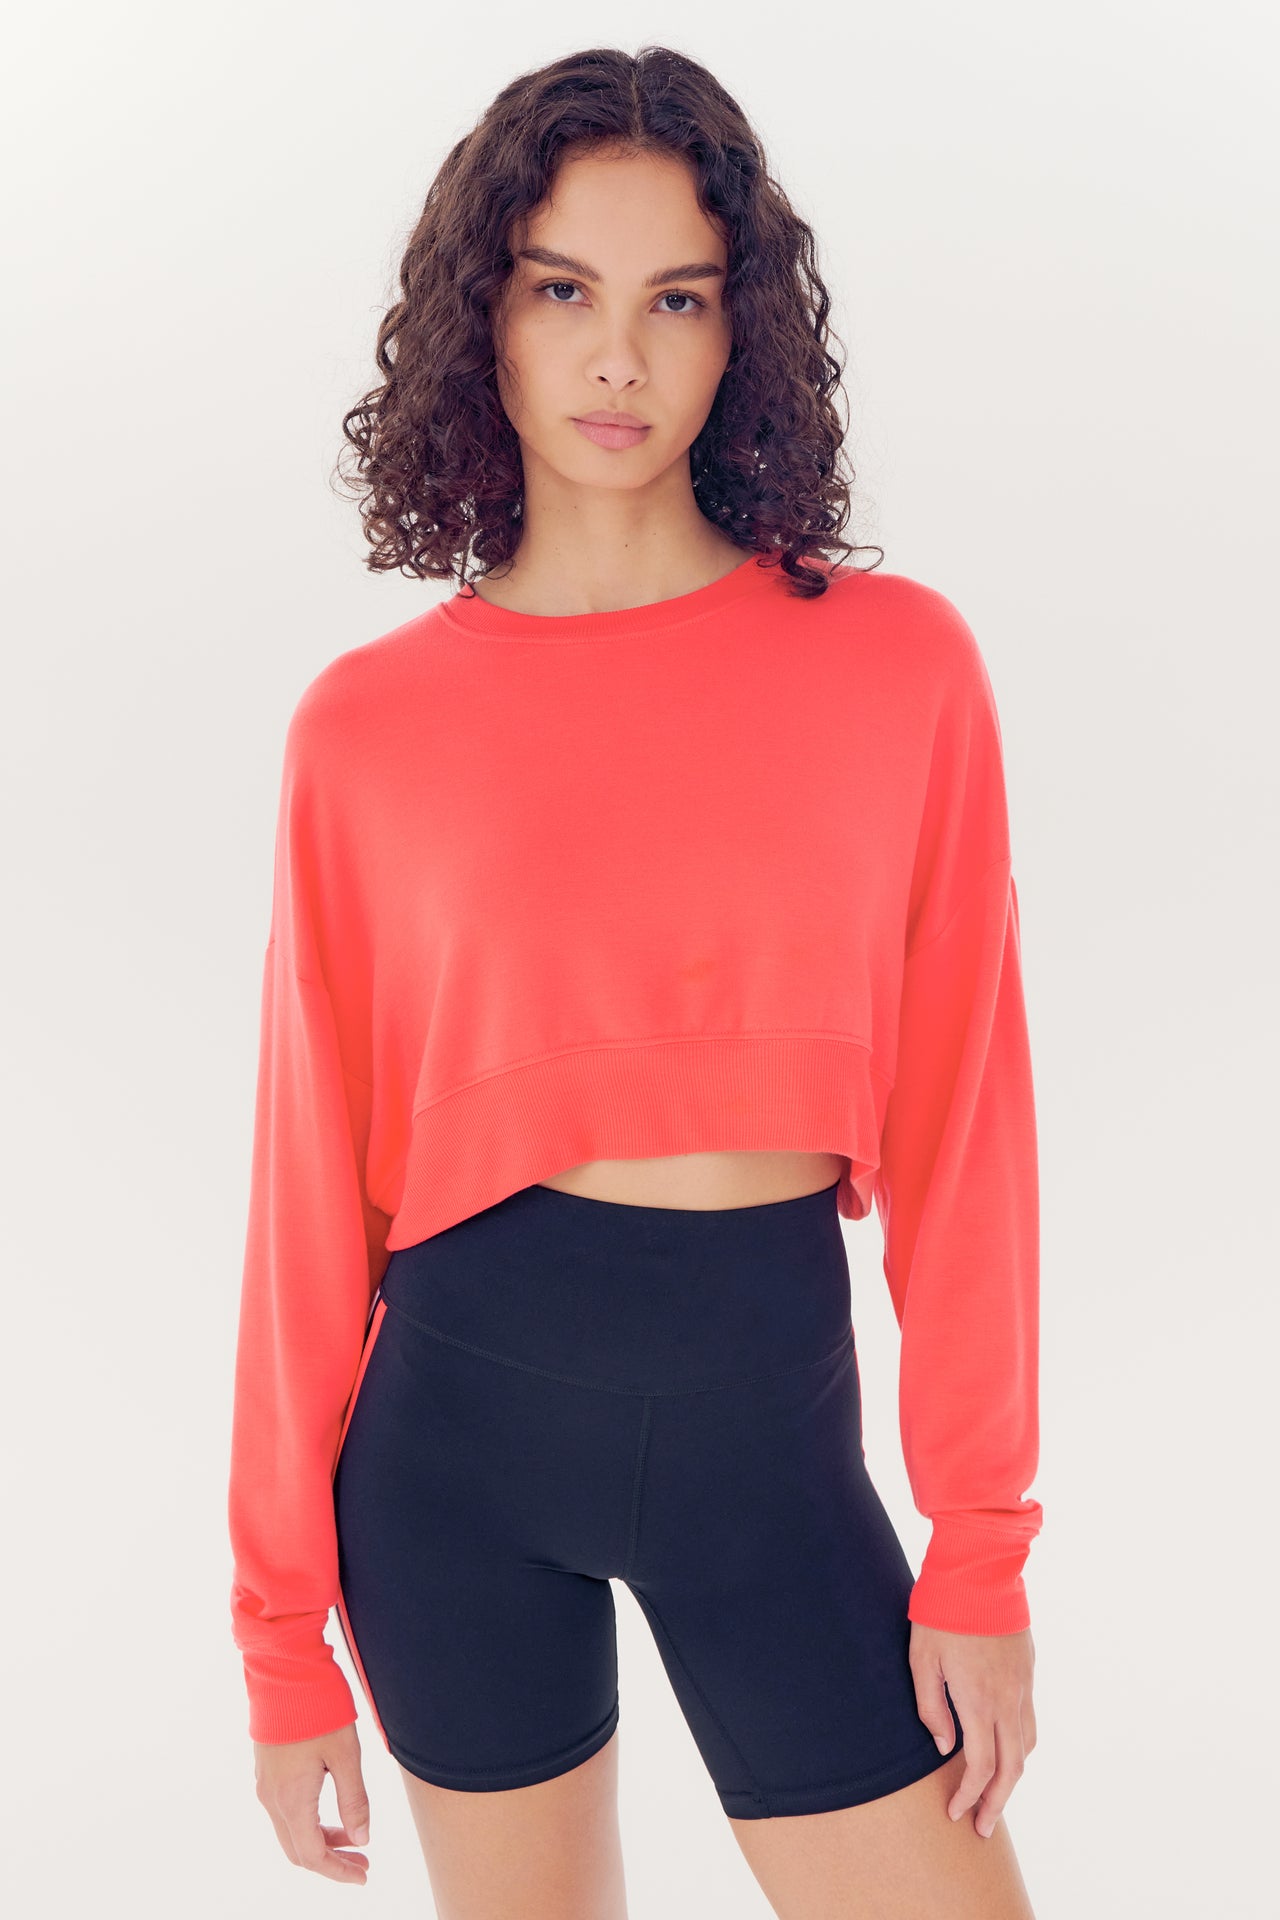 A young woman wearing a Noah Fleece Crop Sweatshirt in melon by SPLITS59, and black shorts, both made of modal spandex blend, against a white background.